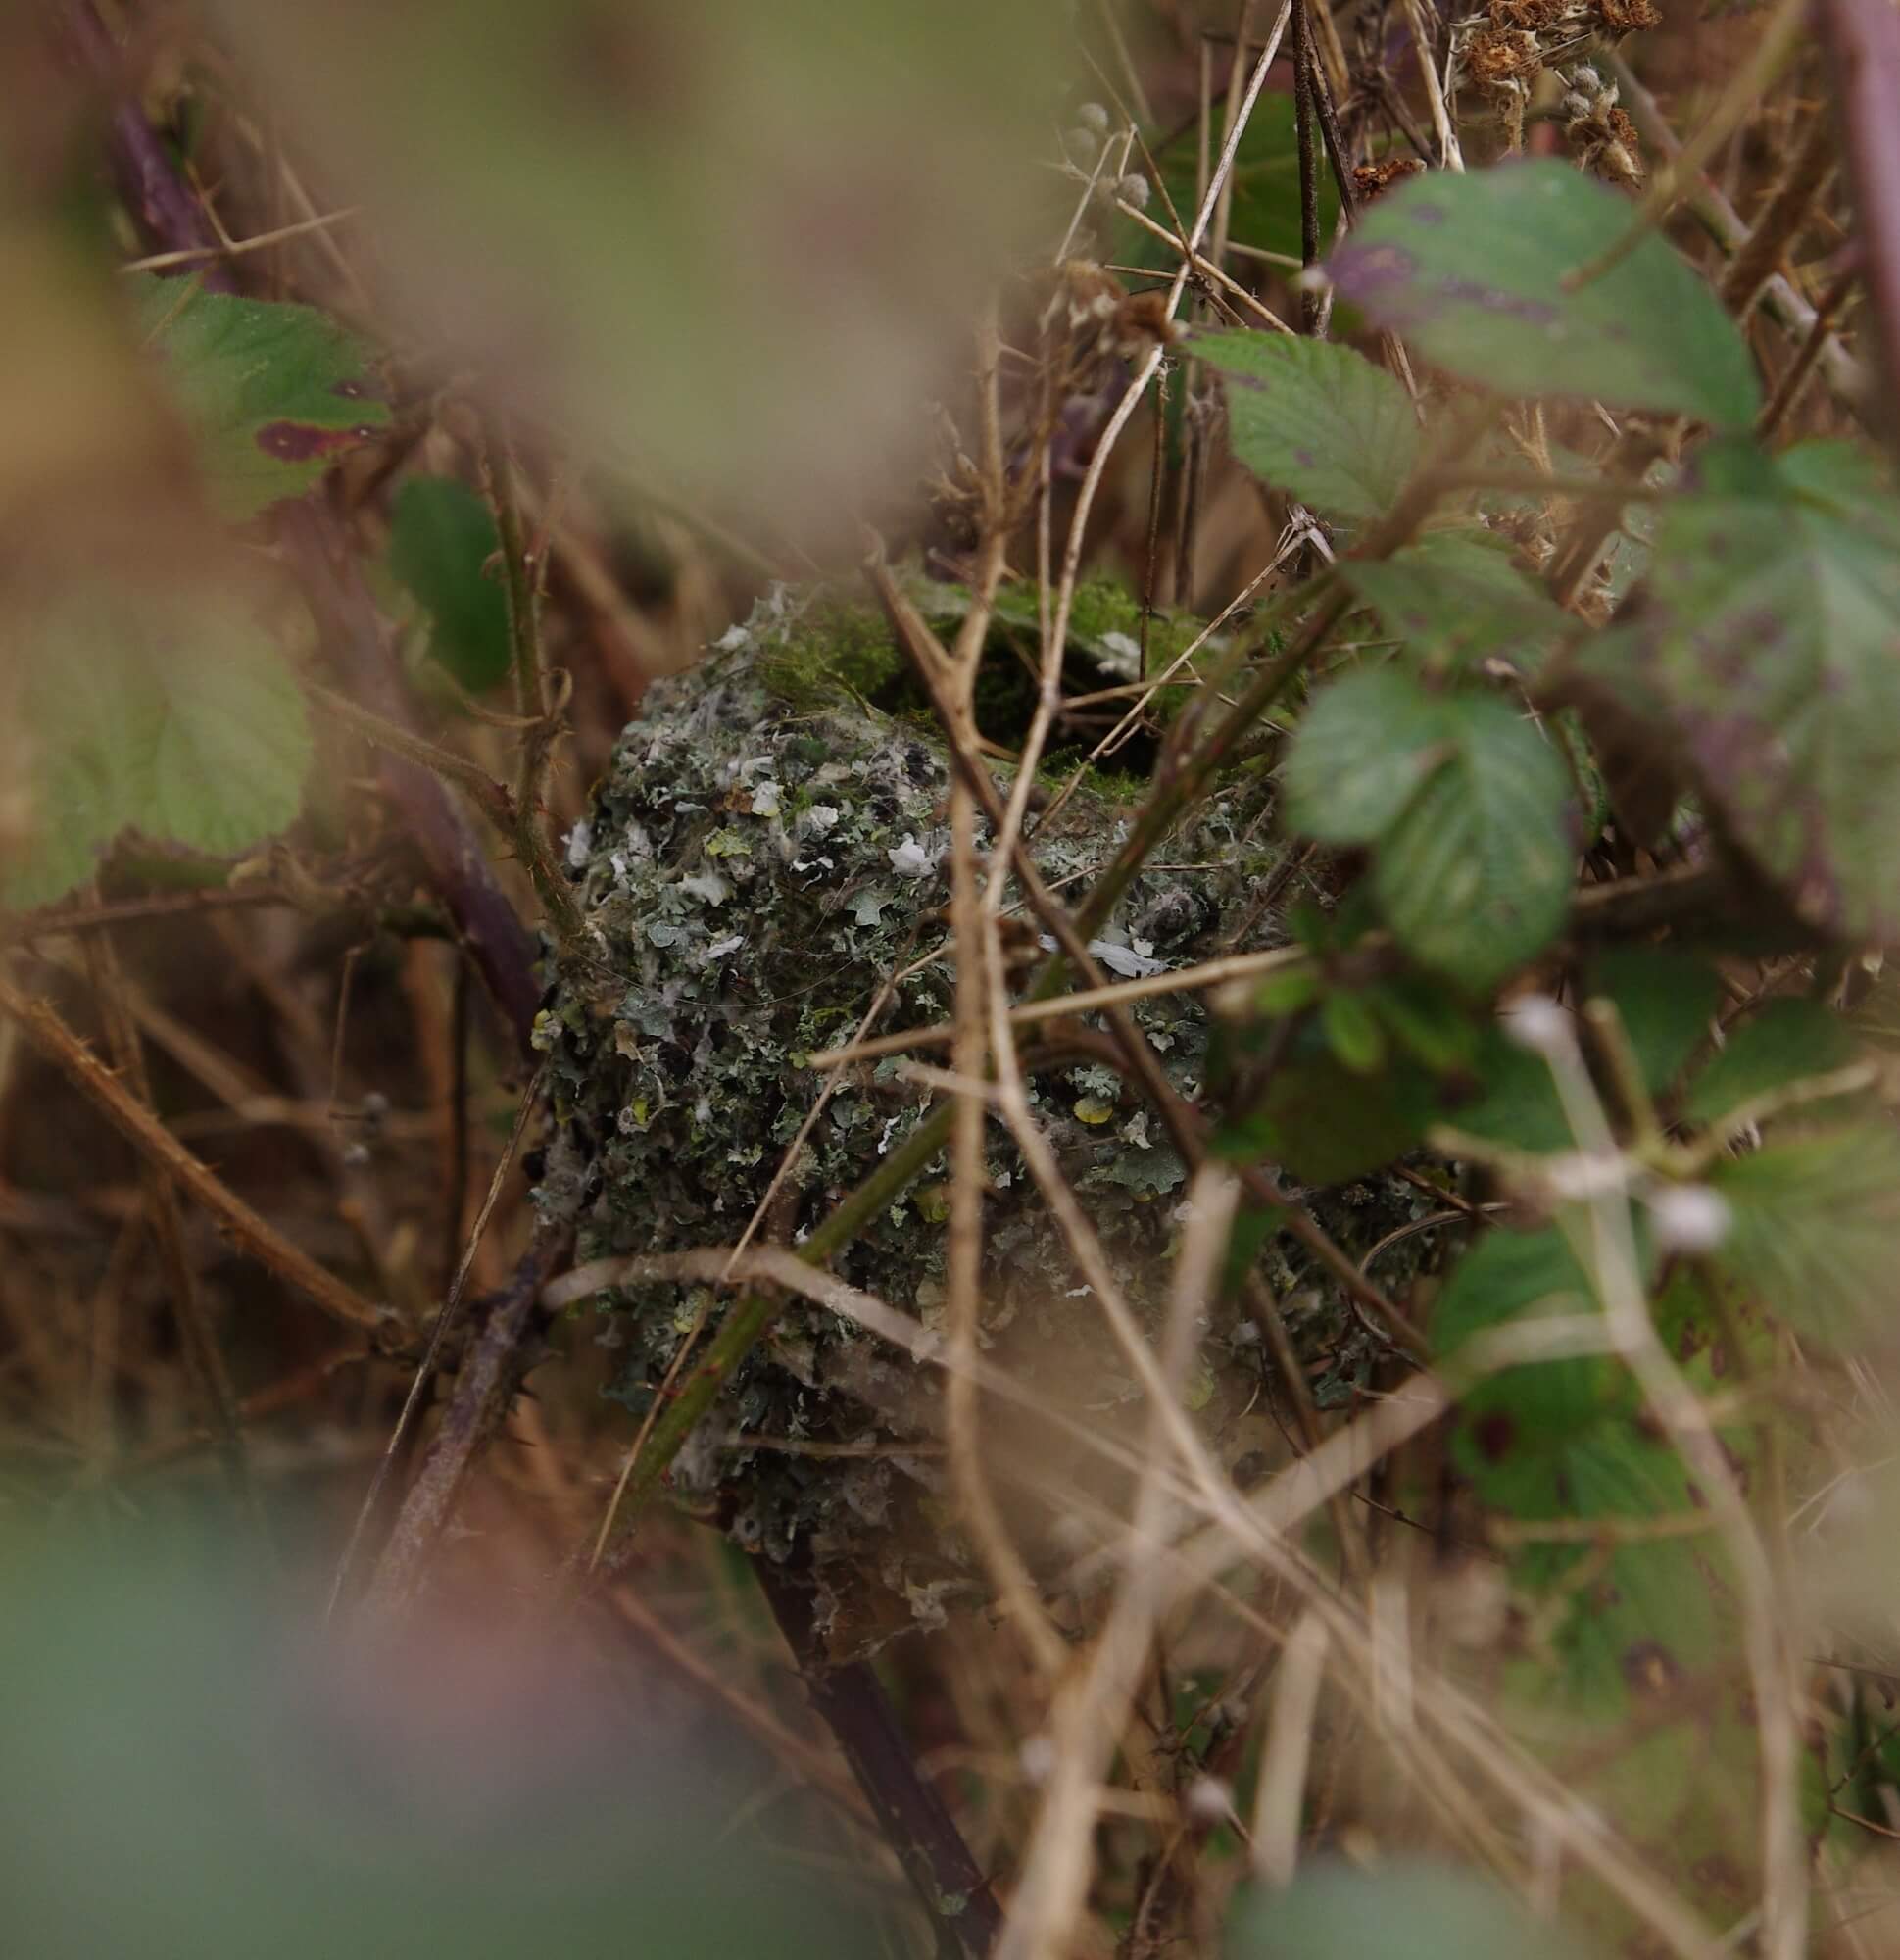 Long-tailed tit nest